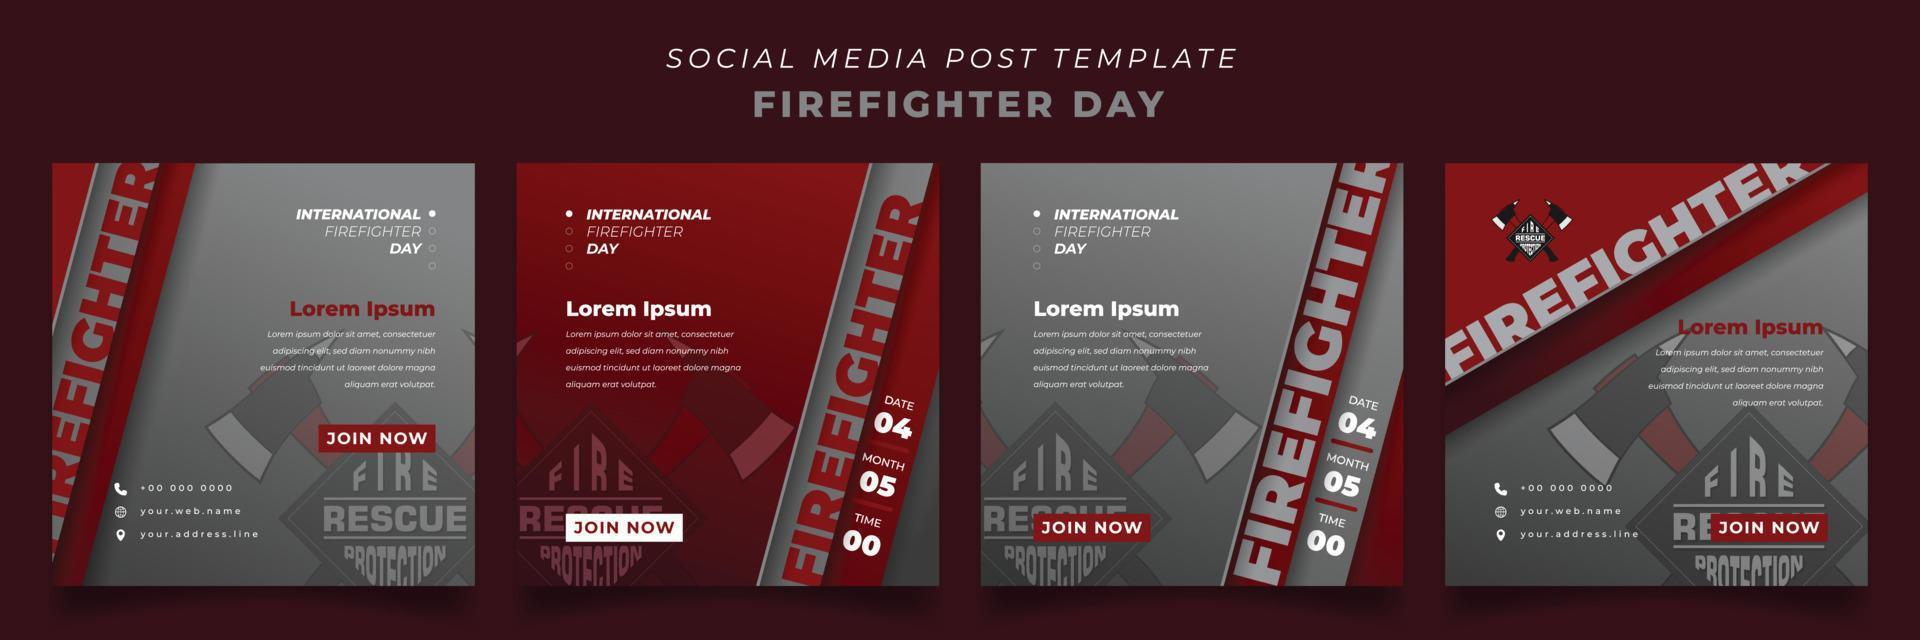 Set of social media post template with red and gray background for firefighter day design vector